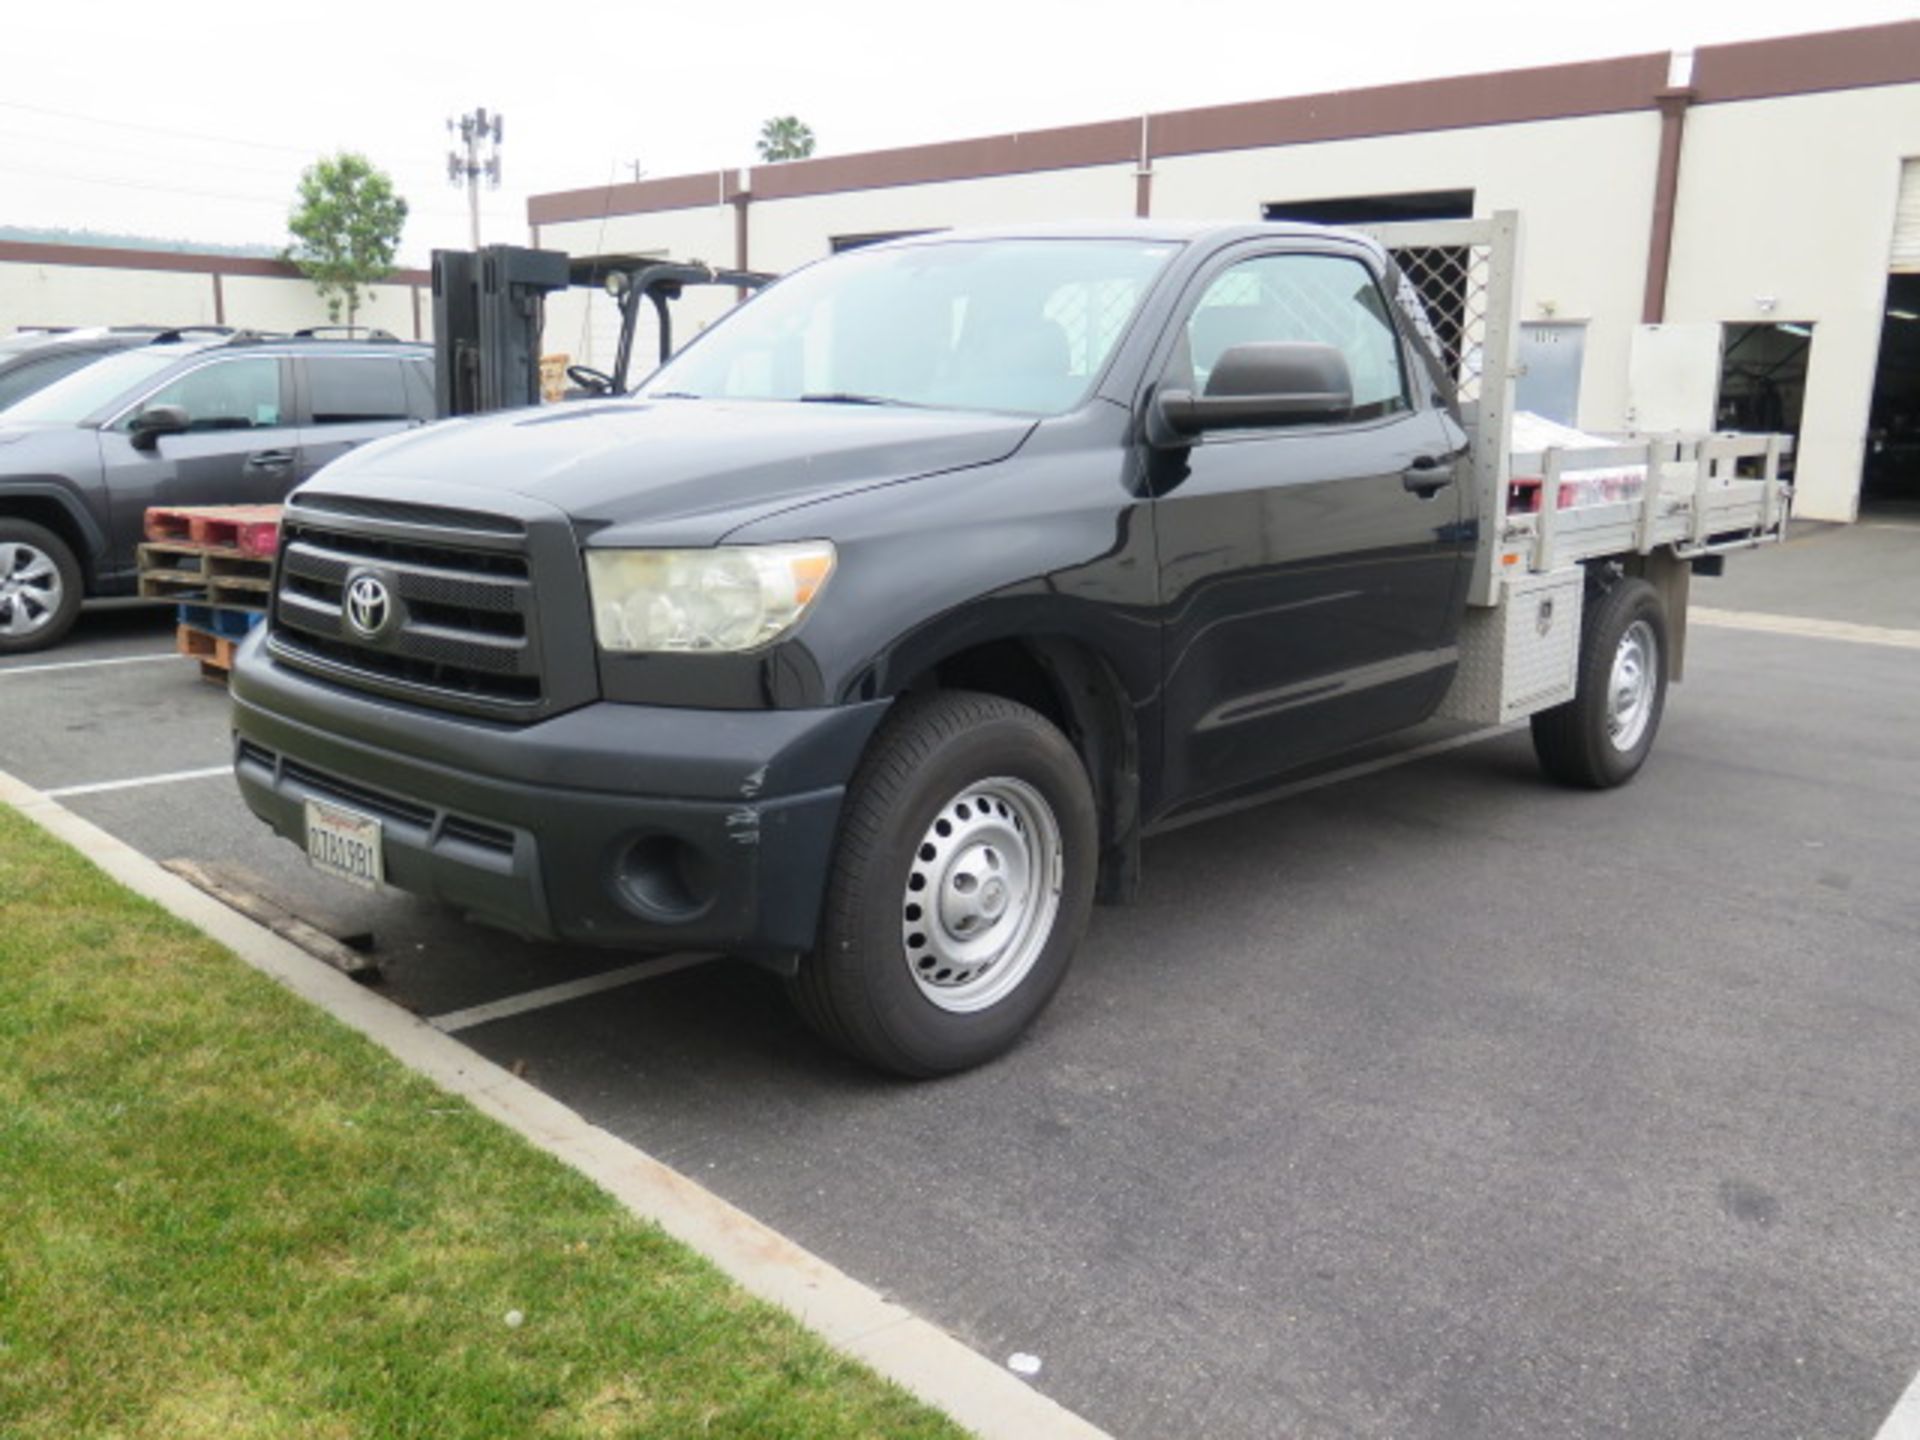 2011 Toyota Tundra 12’ Stake Bed Truck Lisc# 07819B1 w/ Gas Engine, Automatic Trans, SOLD AS IS - Image 2 of 24